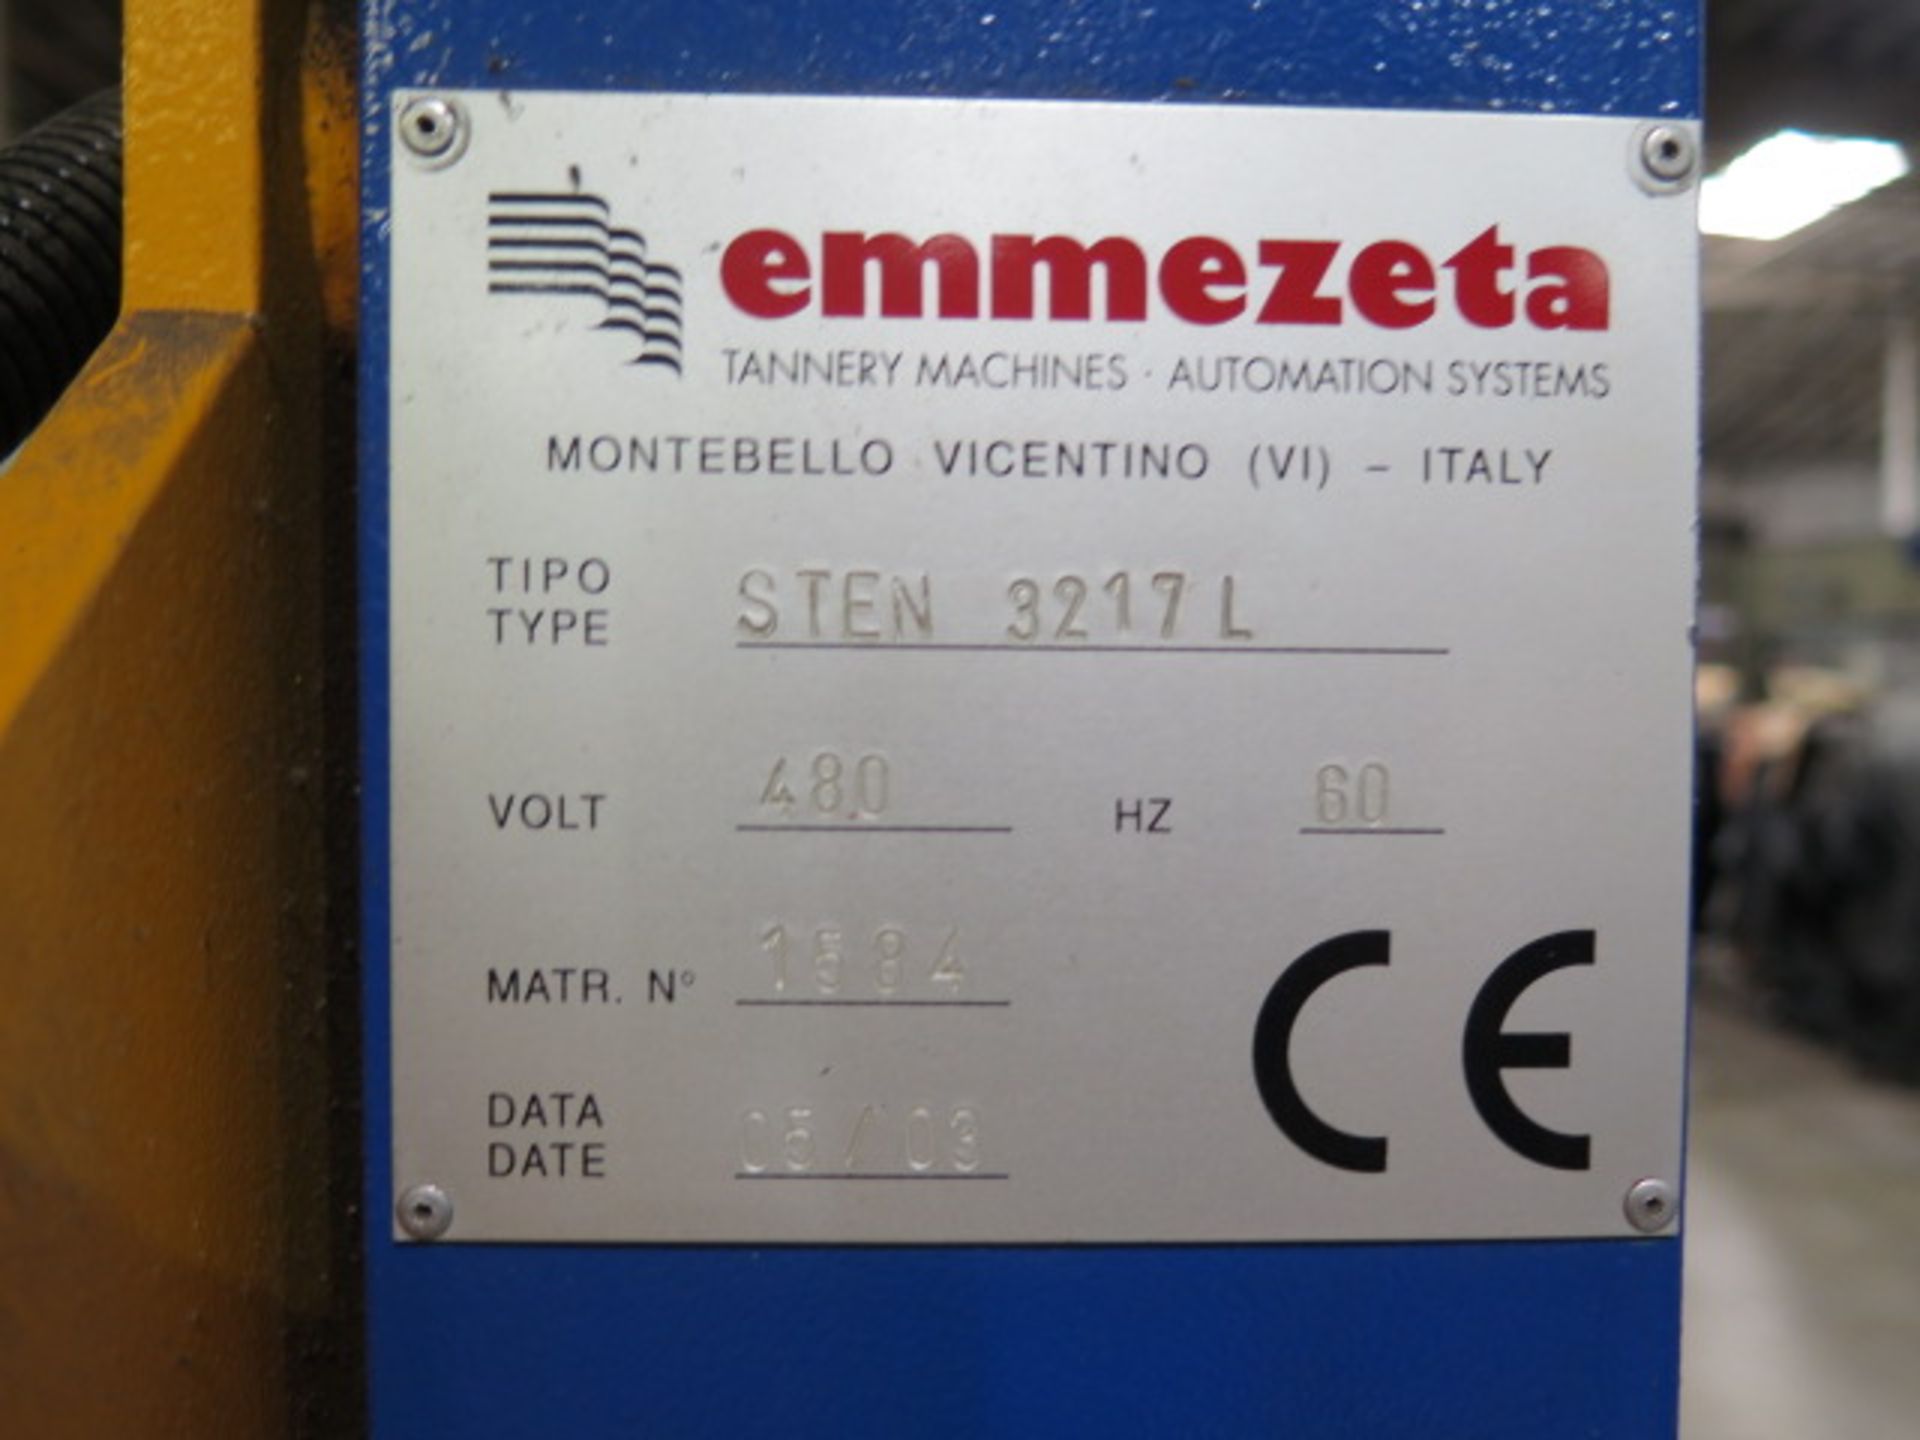 2003 Emmezeta Tannery mdl. STEN 3217L 3-Meter Universal Stacker s/n 1584 w/ PLC Controls, SOLD AS IS - Image 13 of 13